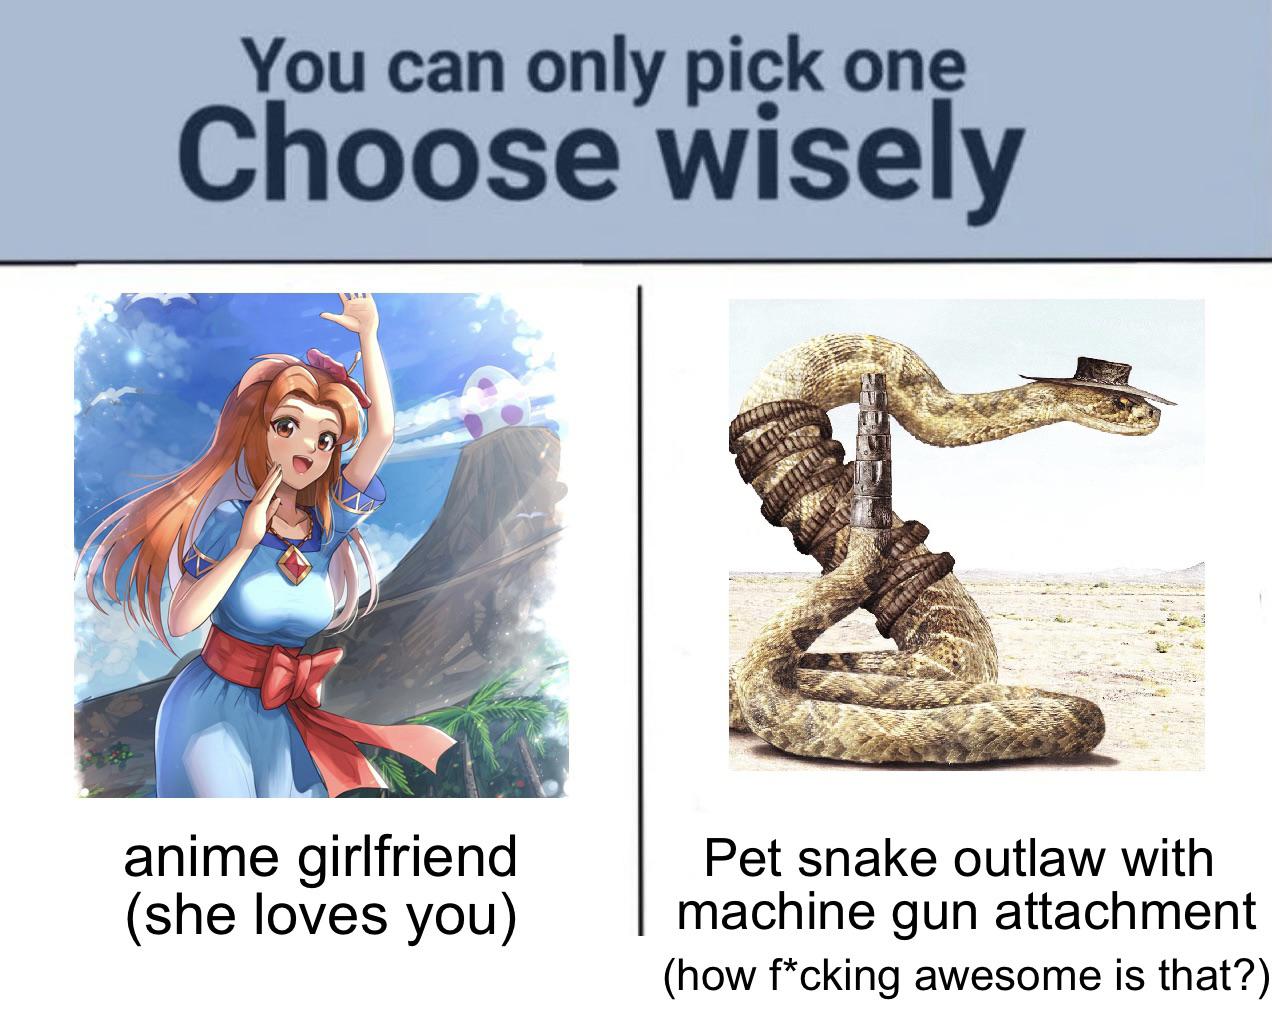 you can only pick one choose wisely - You can only pick one Choose wisely anime girlfriend she loves you Pet snake outlaw with machine gun attachment how fcking awesome is that?